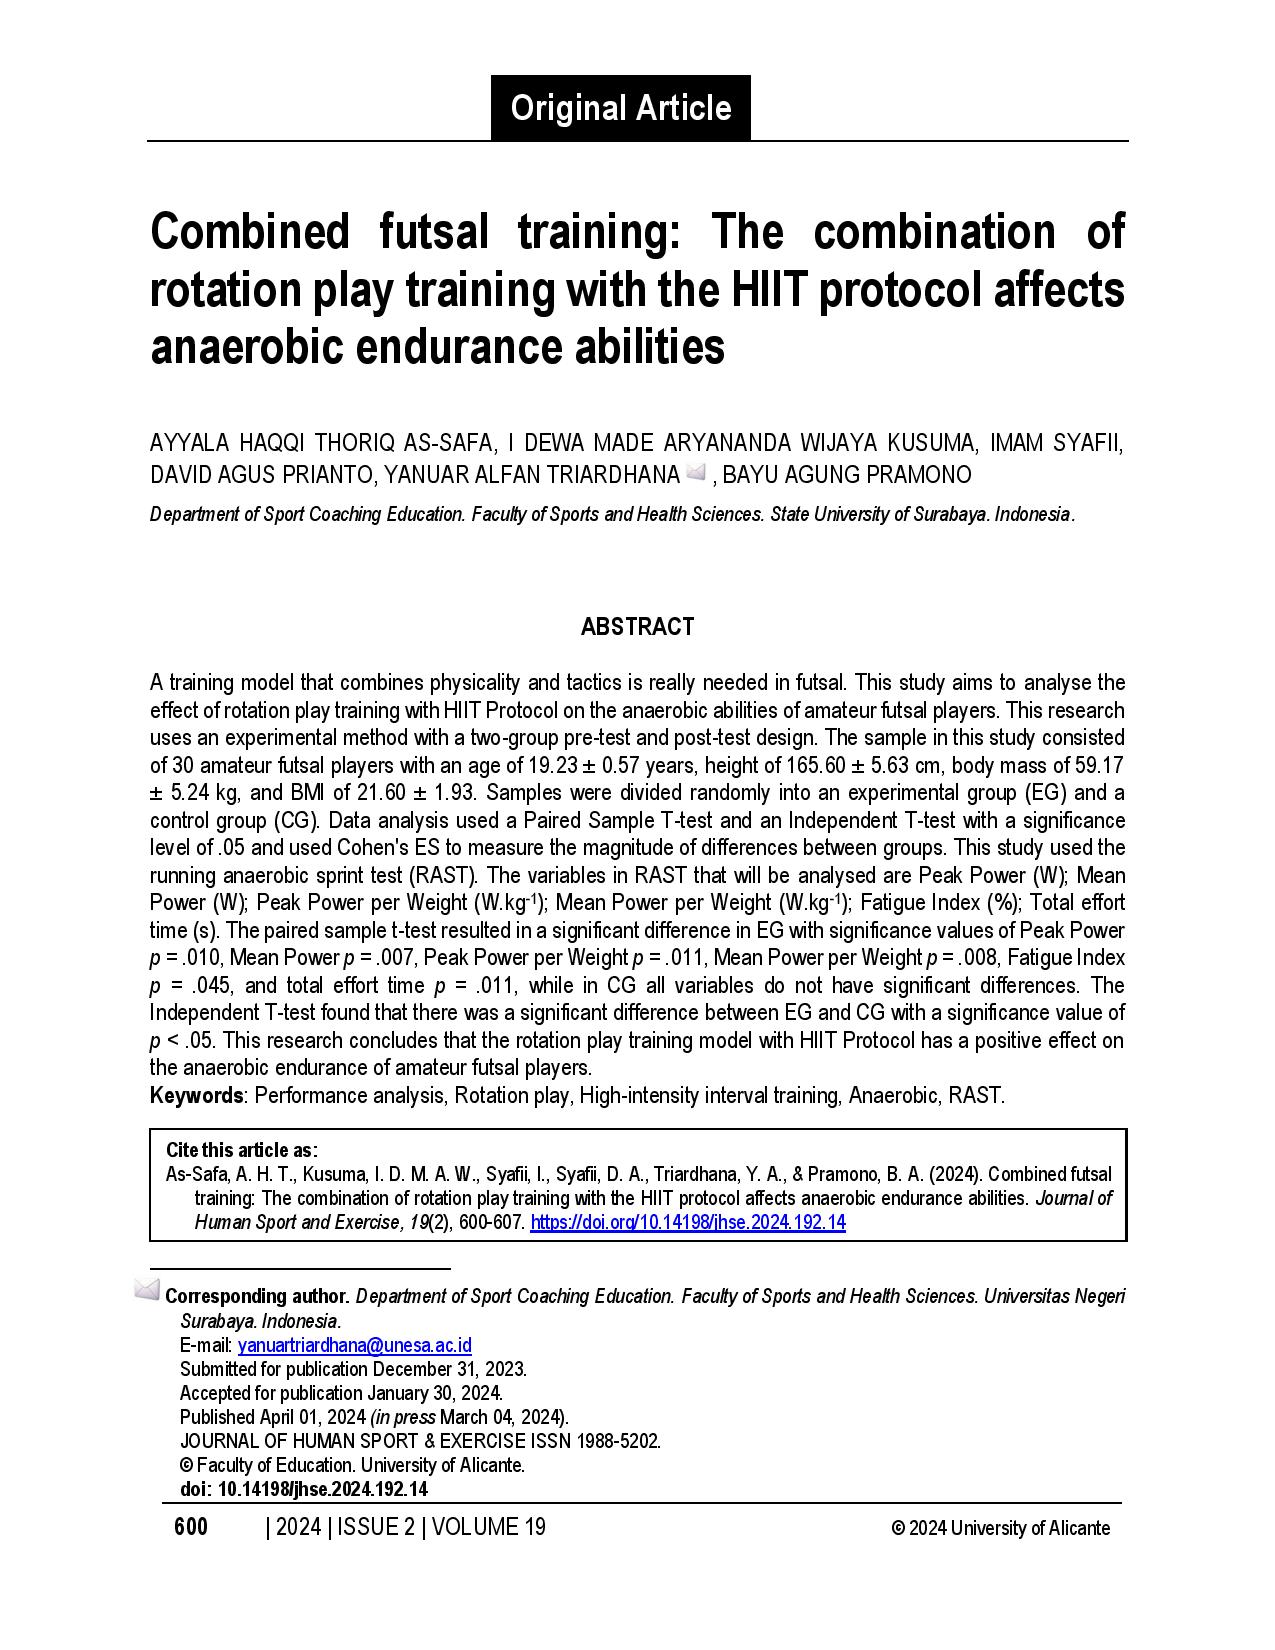 Combined futsal training: The combination of rotation play training with the HIIT protocol affects anaerobic endurance abilities